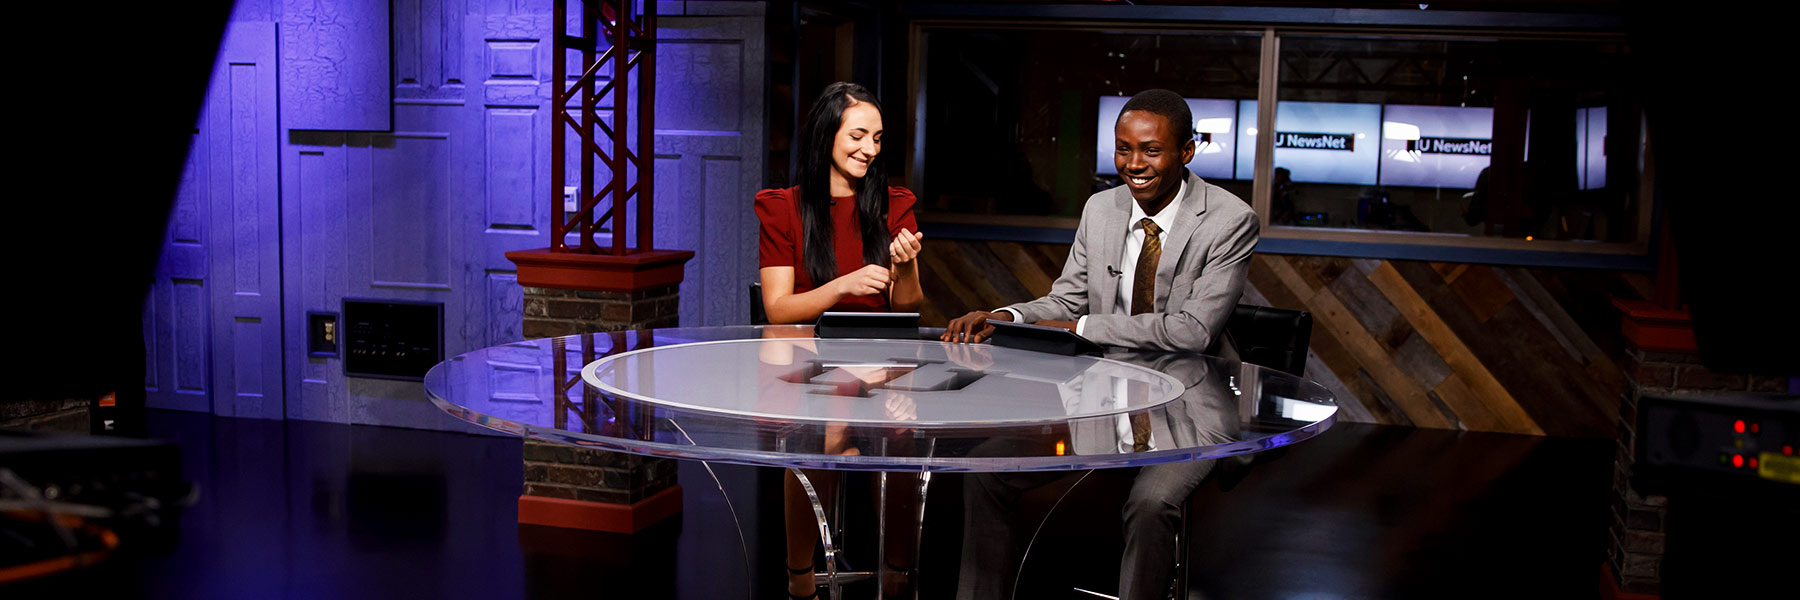 Two students sitting at a table in the TV studio prepare for a broadcast.